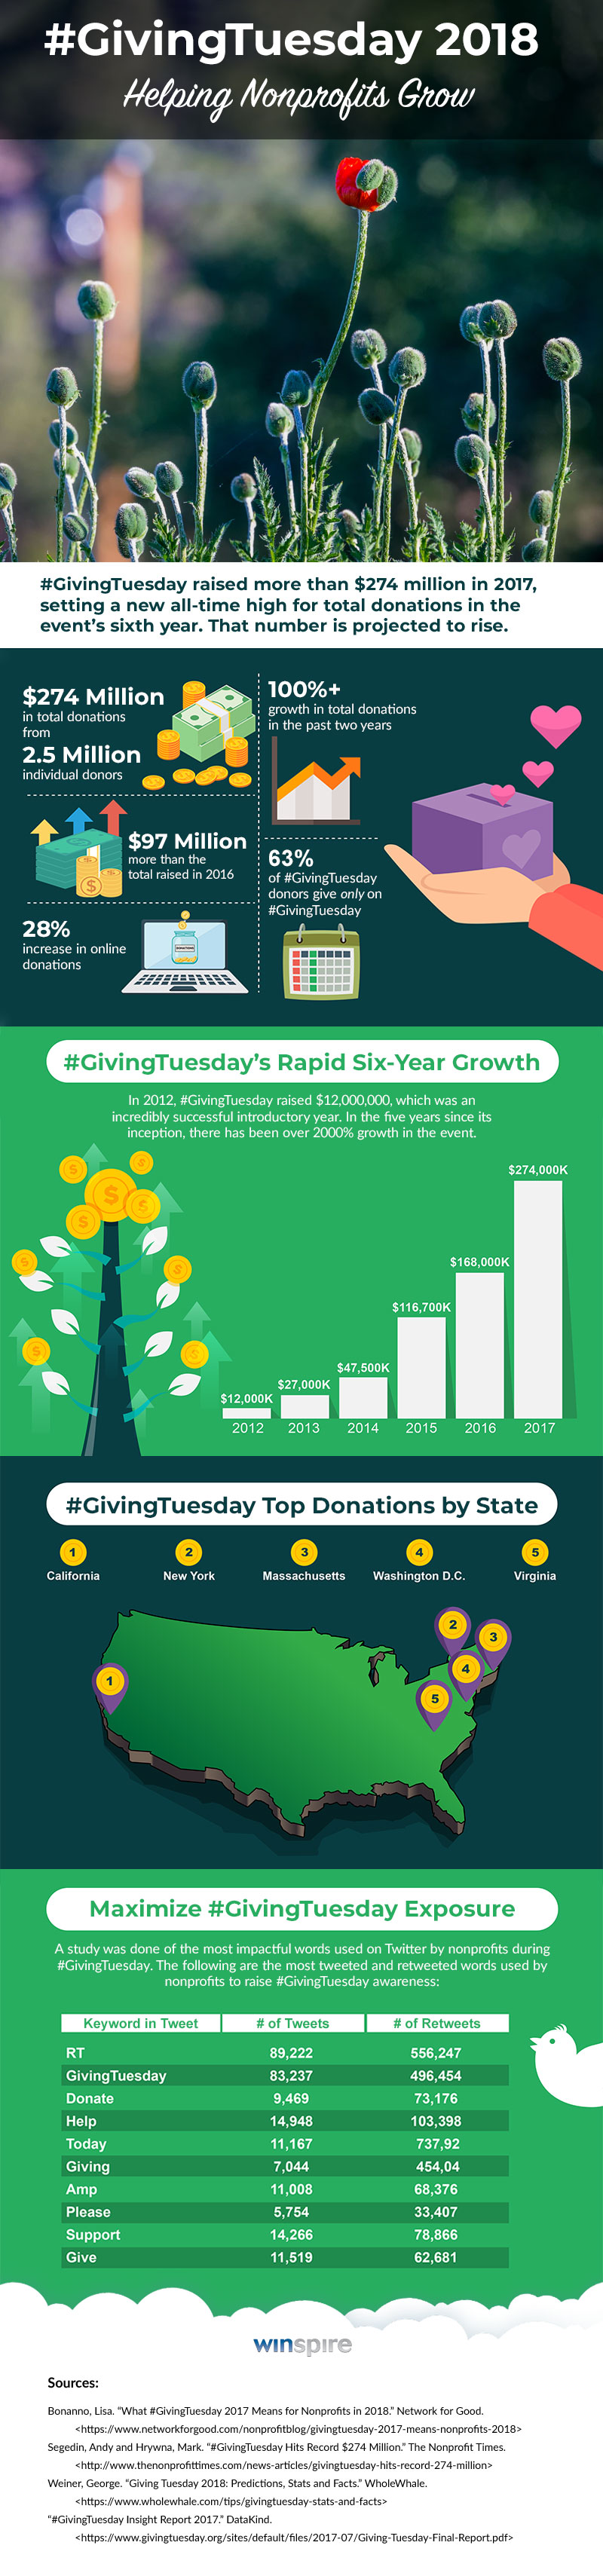 Winspire-GivingTuesday-2018-Infographic